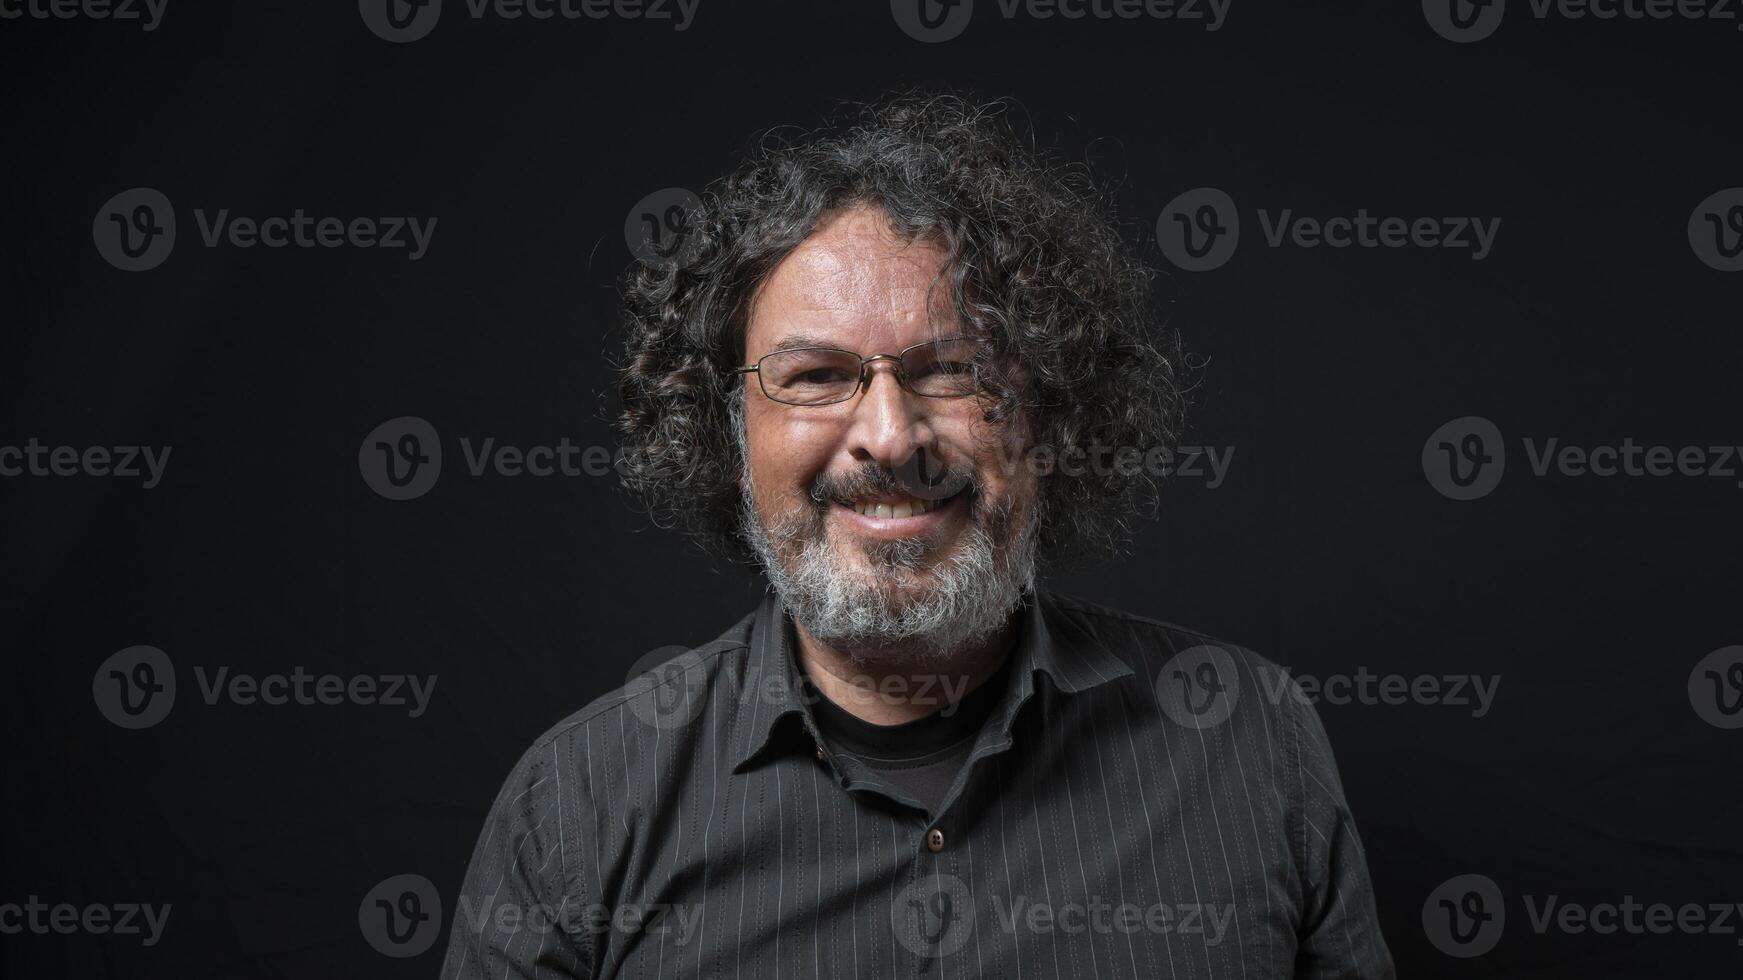 Man with white beard and black curly hair with happy expression, seen from front, wearing black shirt against black background photo